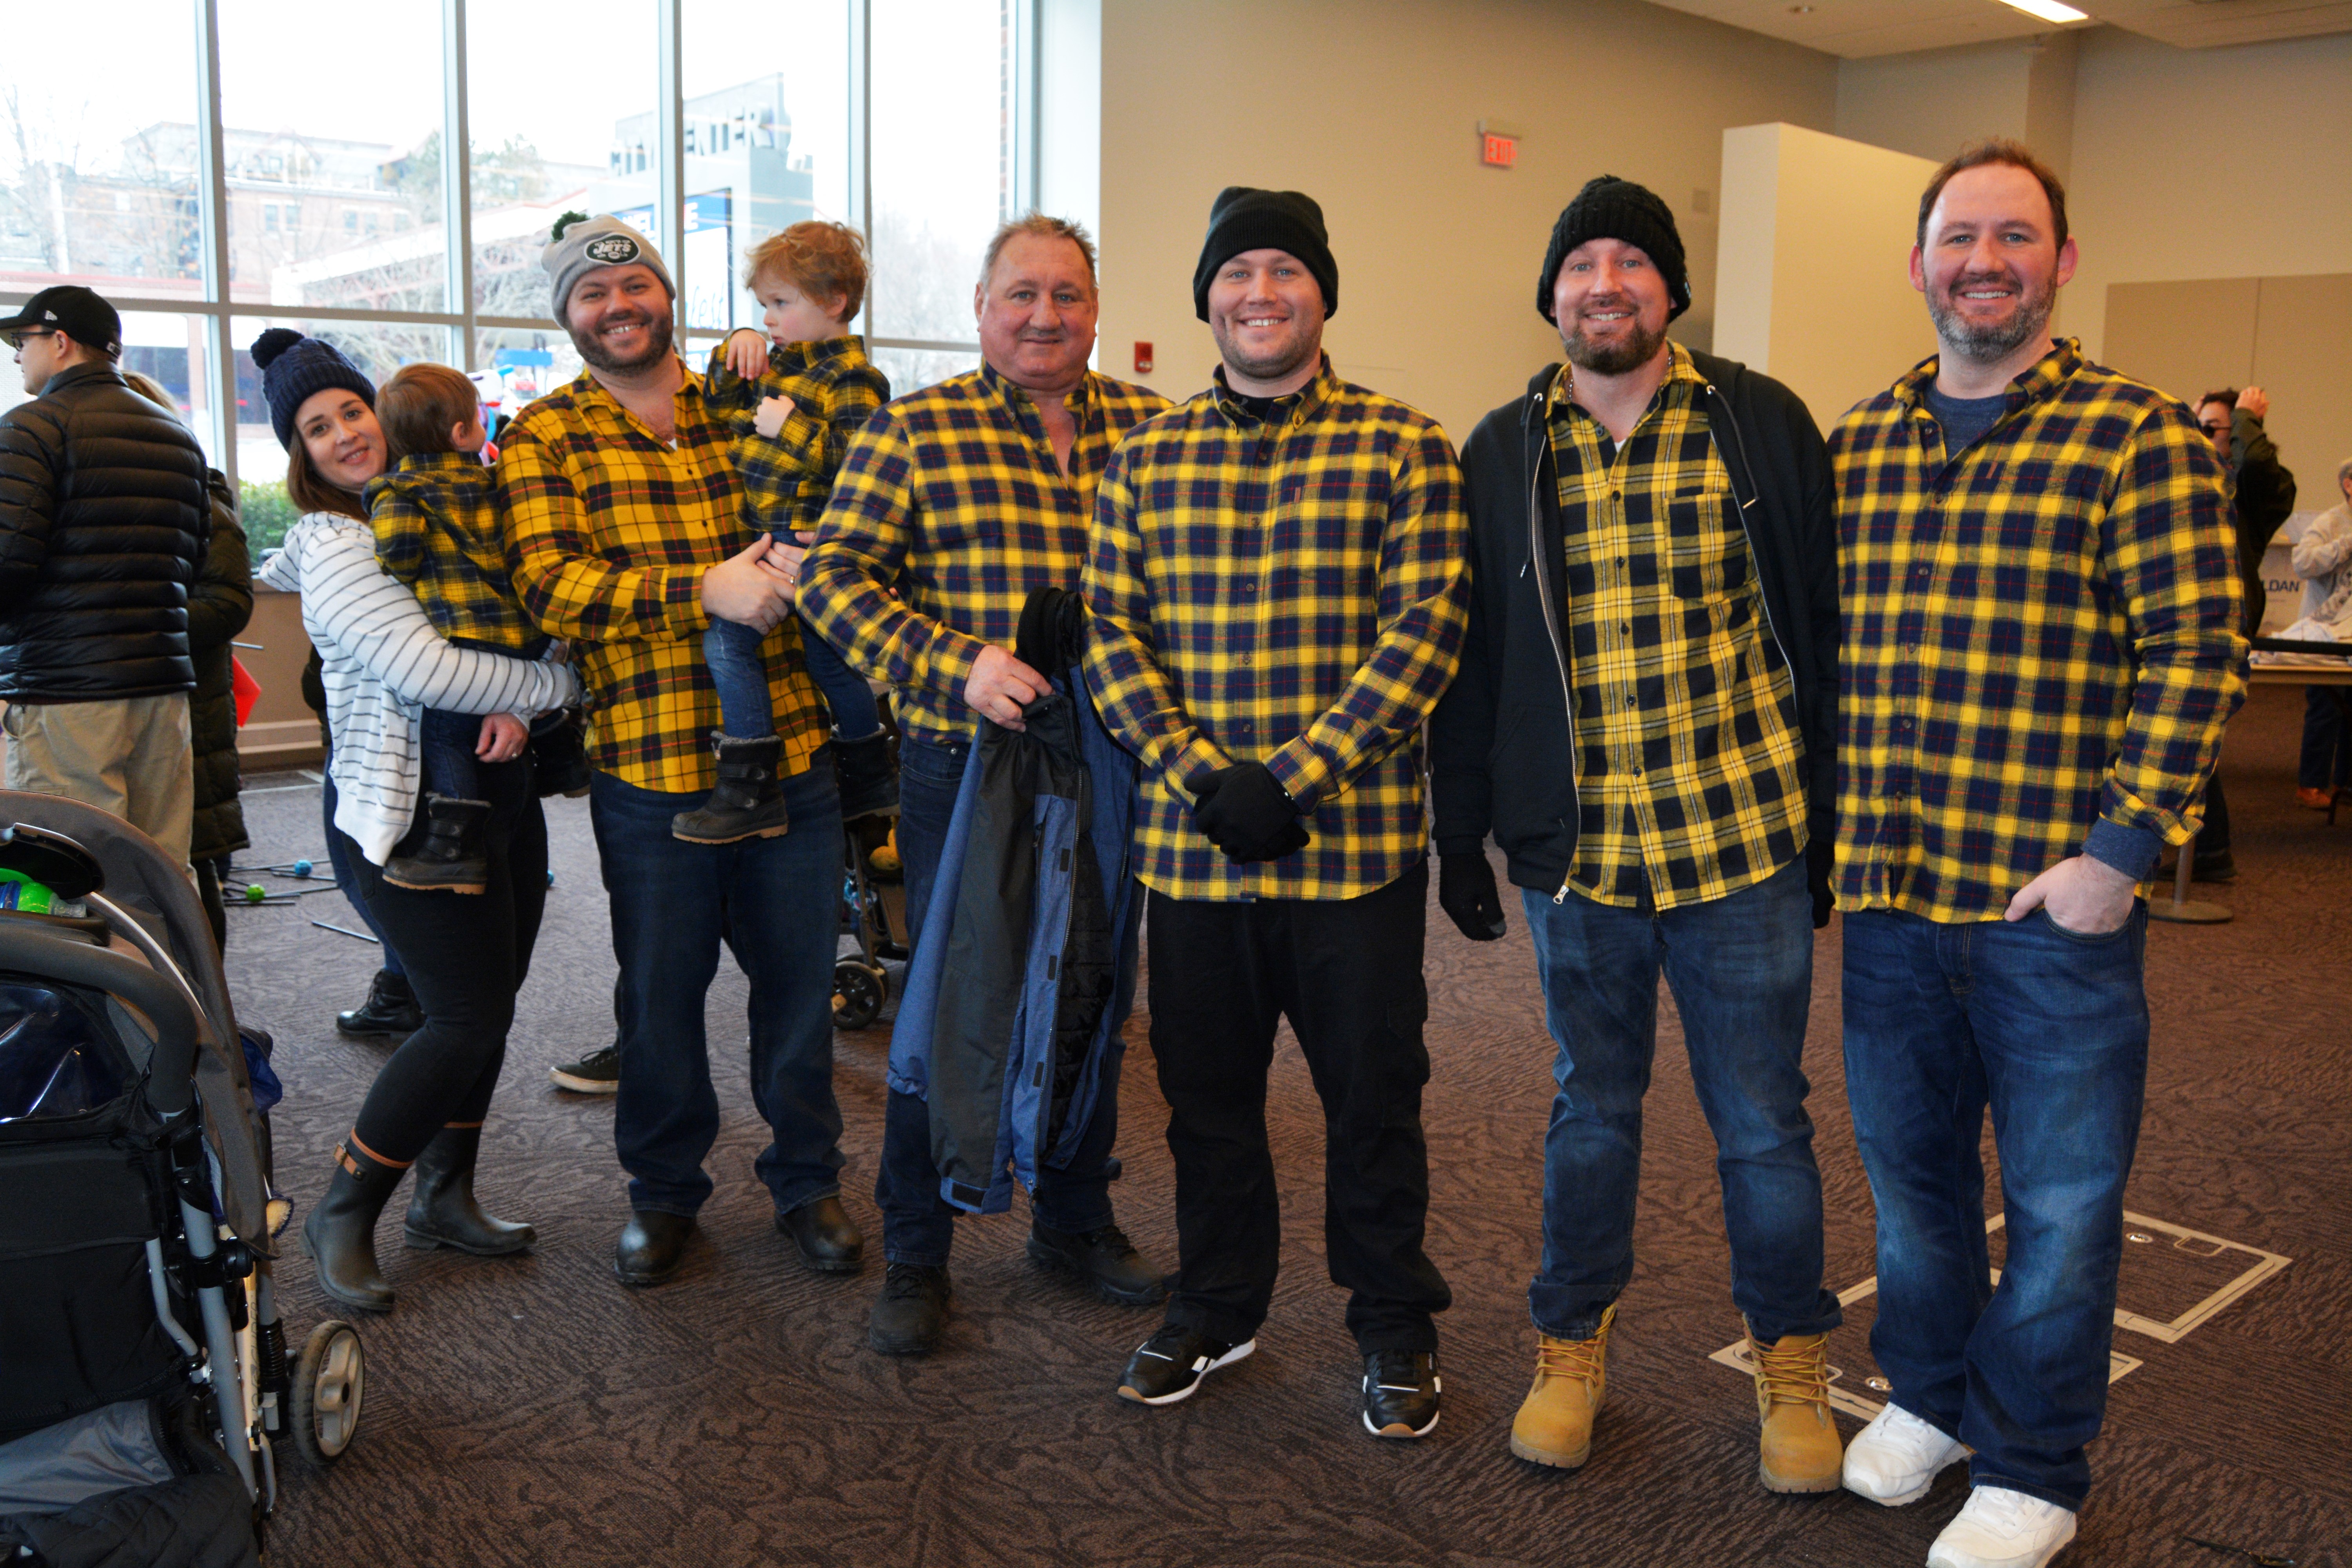 Group of 5 men and 2 boys dressed in yellow plaid